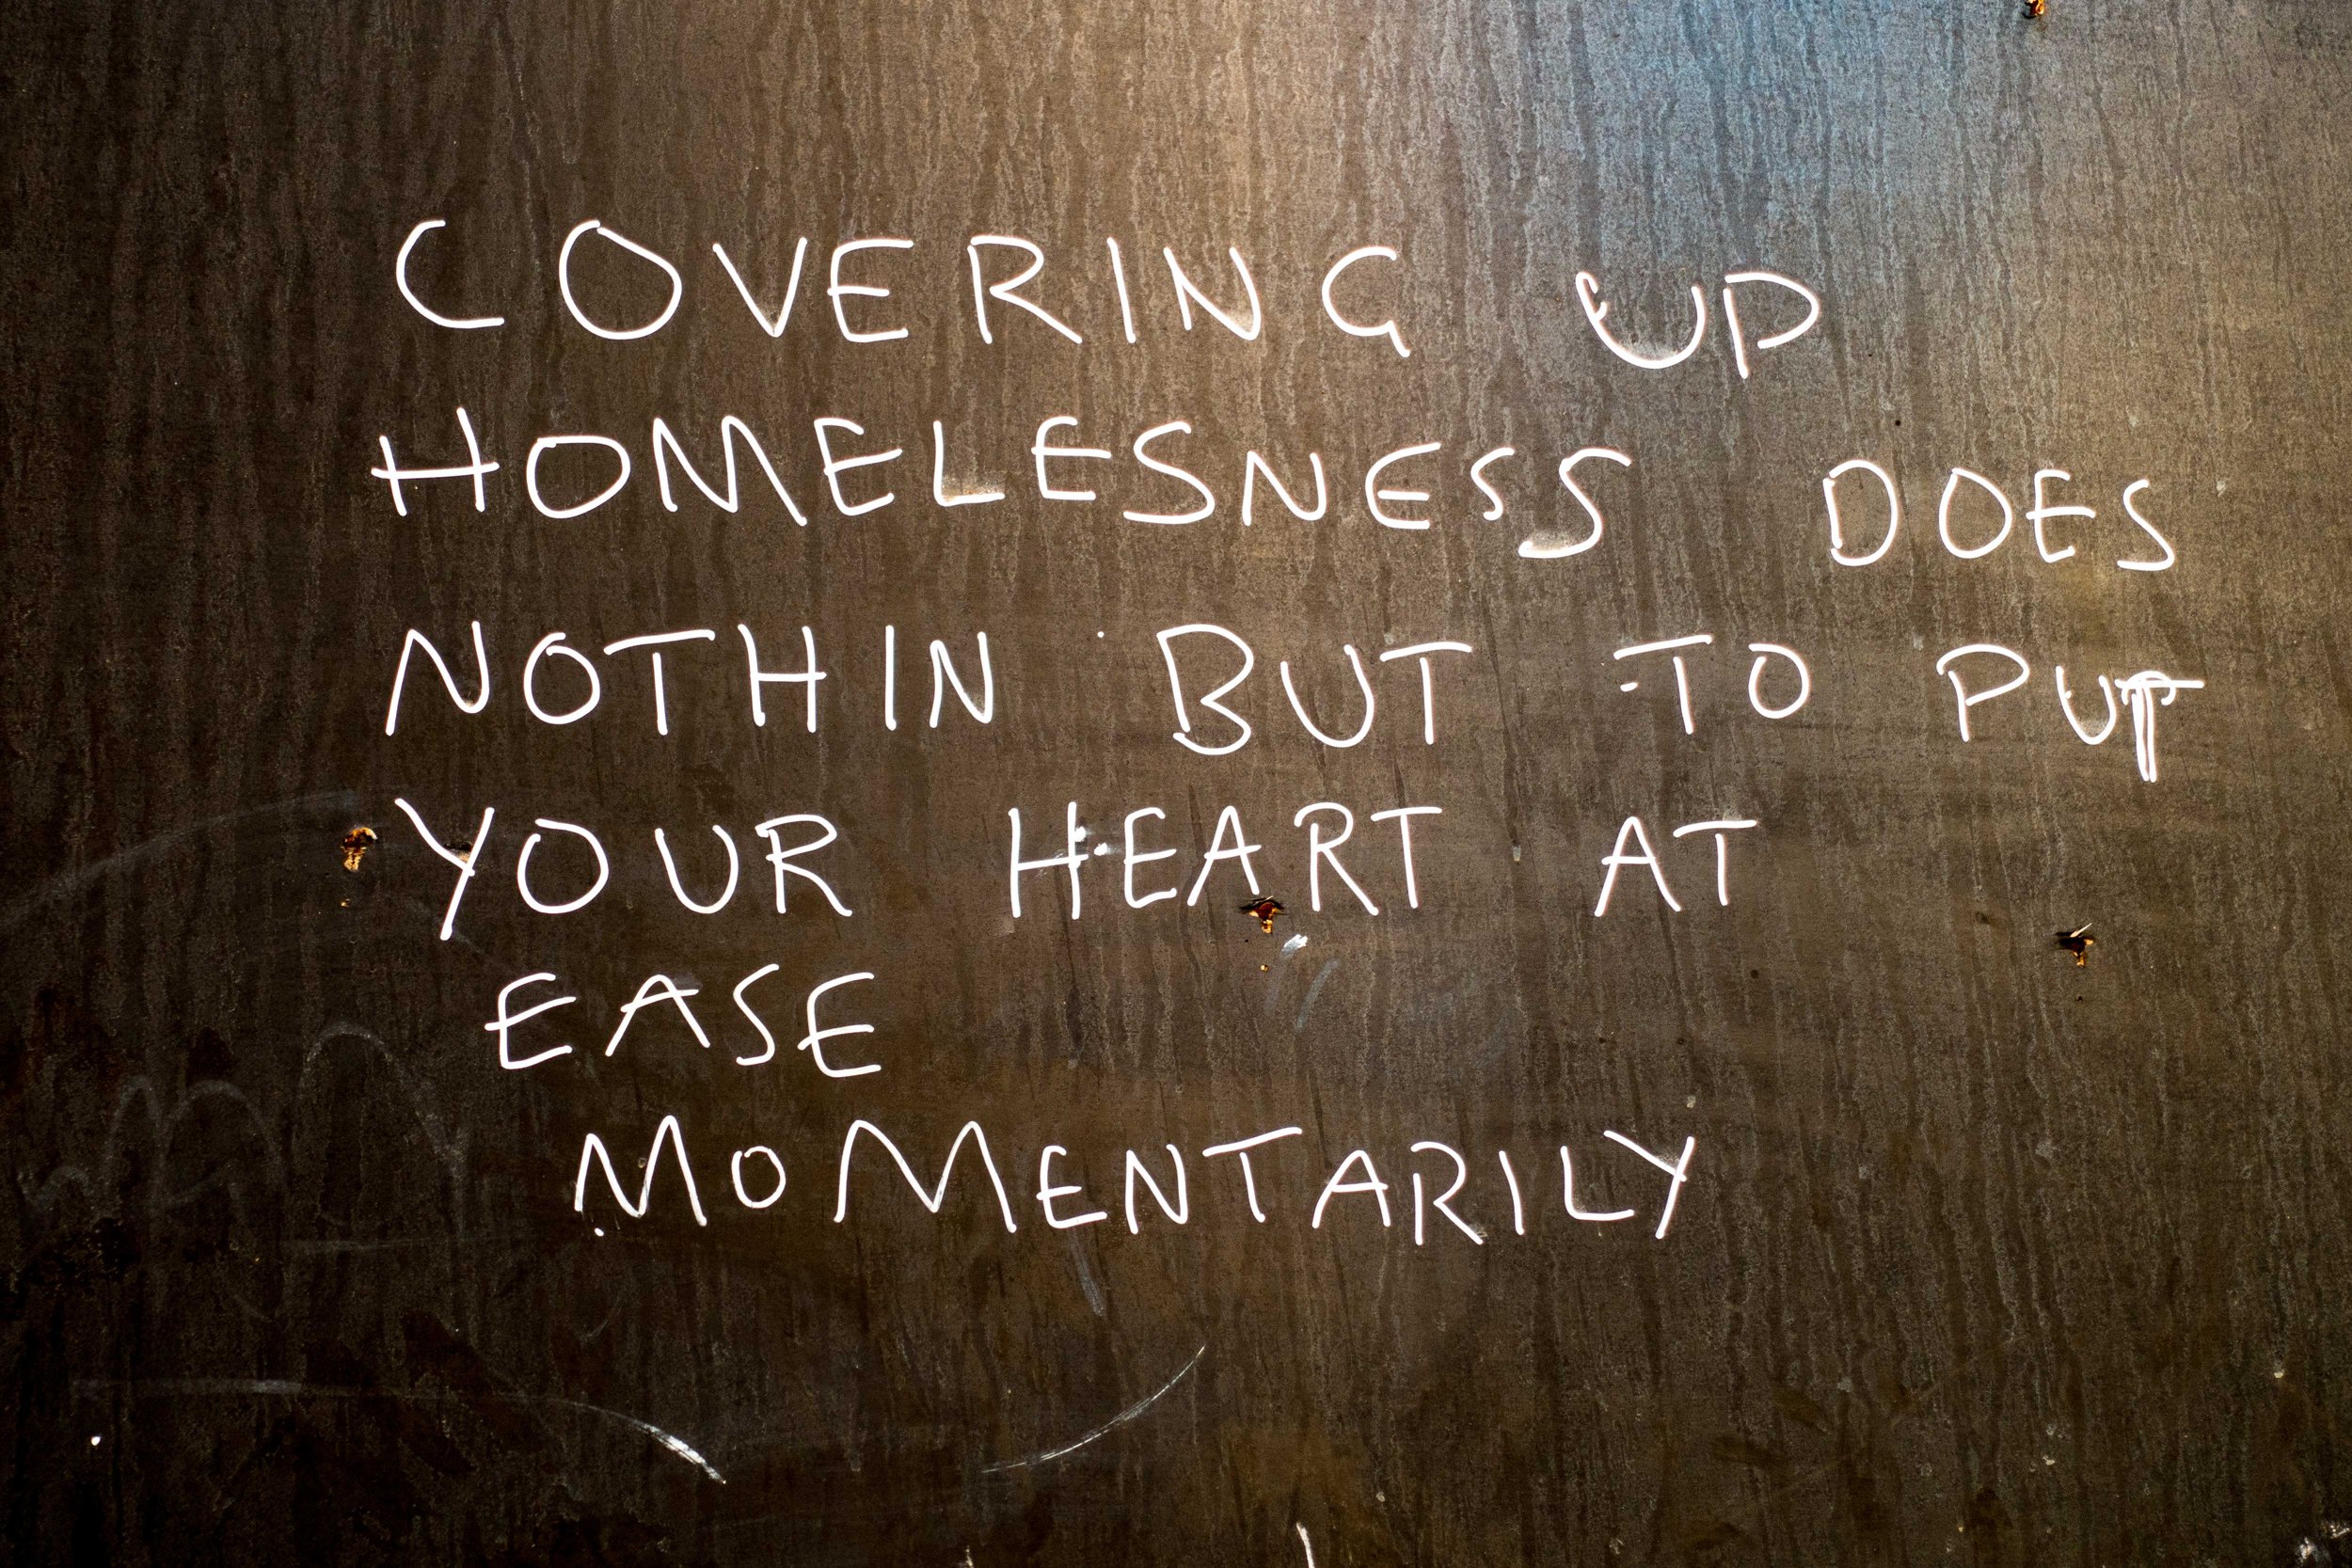 Covering Up Homelessness